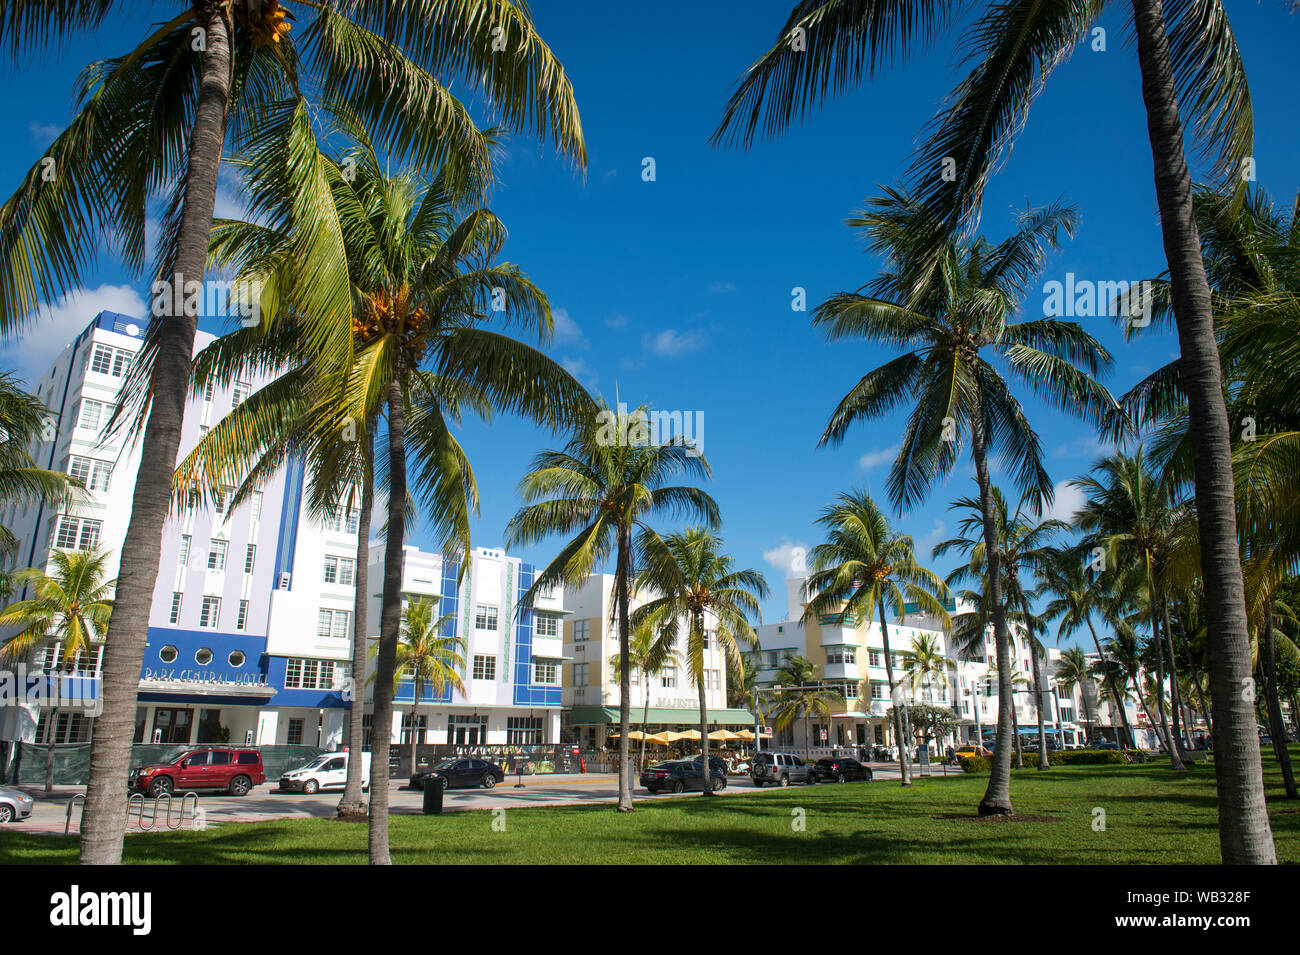 MIAMI - AUGUST 21, 2019: Palm trees stand above the historic Art Deco architecture of Ocean Drive on a quiet summer morning in South Beach. Stock Photo